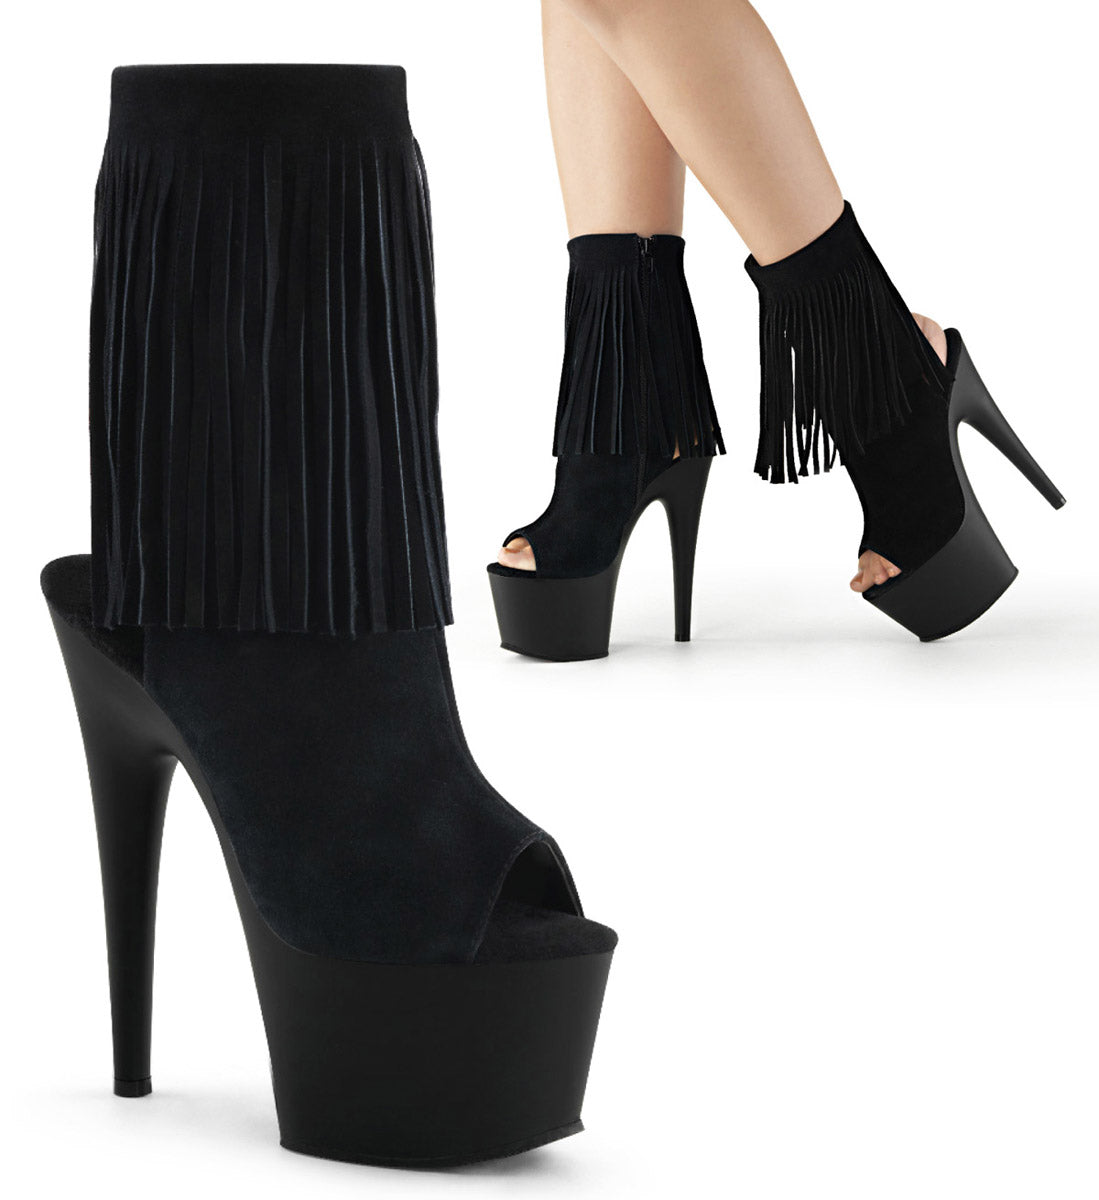 Sexy Fringed Ankle Zip Open Toe Stiletto Platforms High Heels Shoes Pleaser Pleaser ADORE/1019